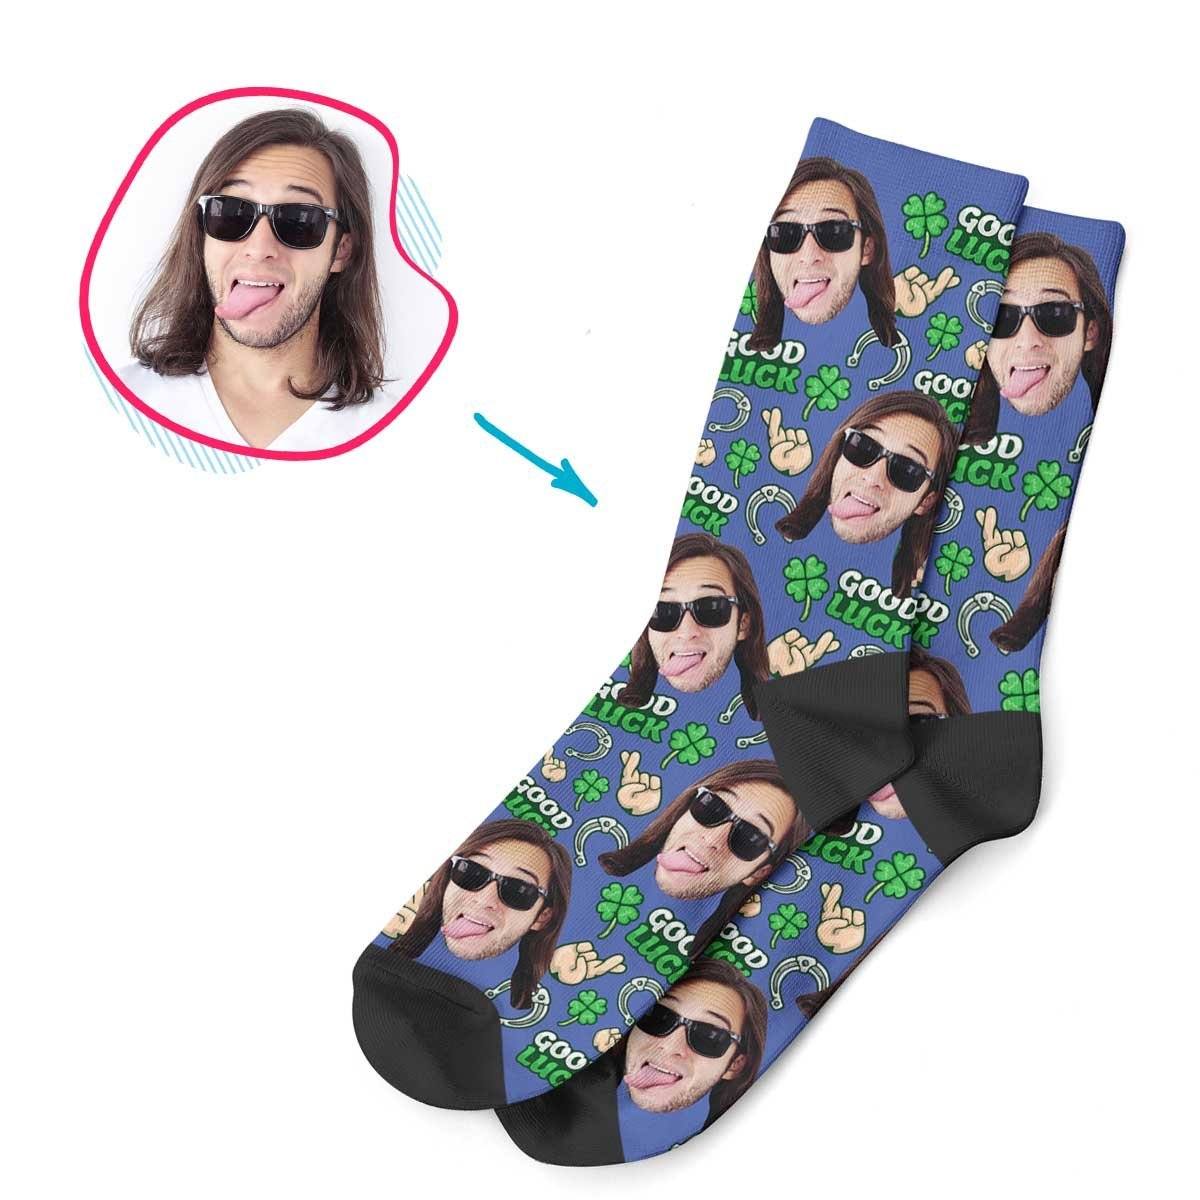 Darkblue Good Luck personalized socks with photo of face printed on them